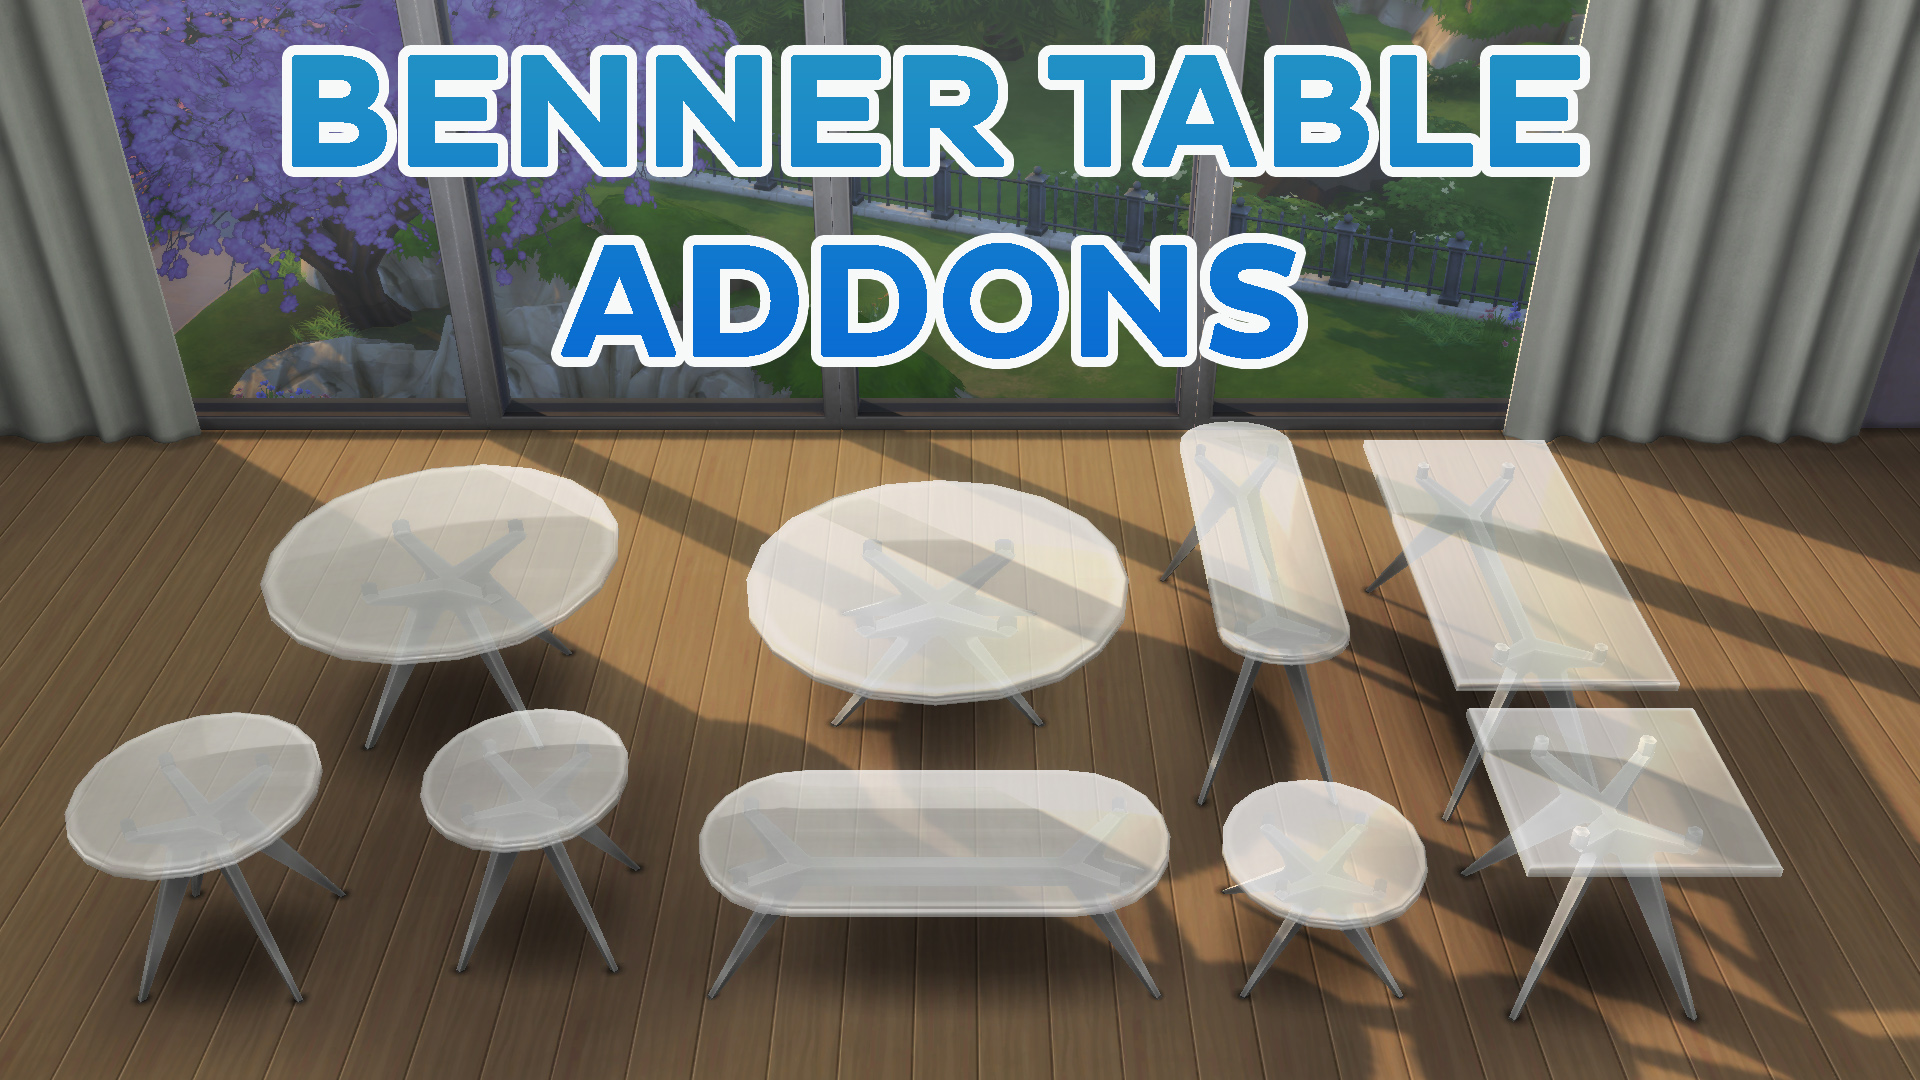 Mod The Sims - Benner Table Add-ons + Recolors!